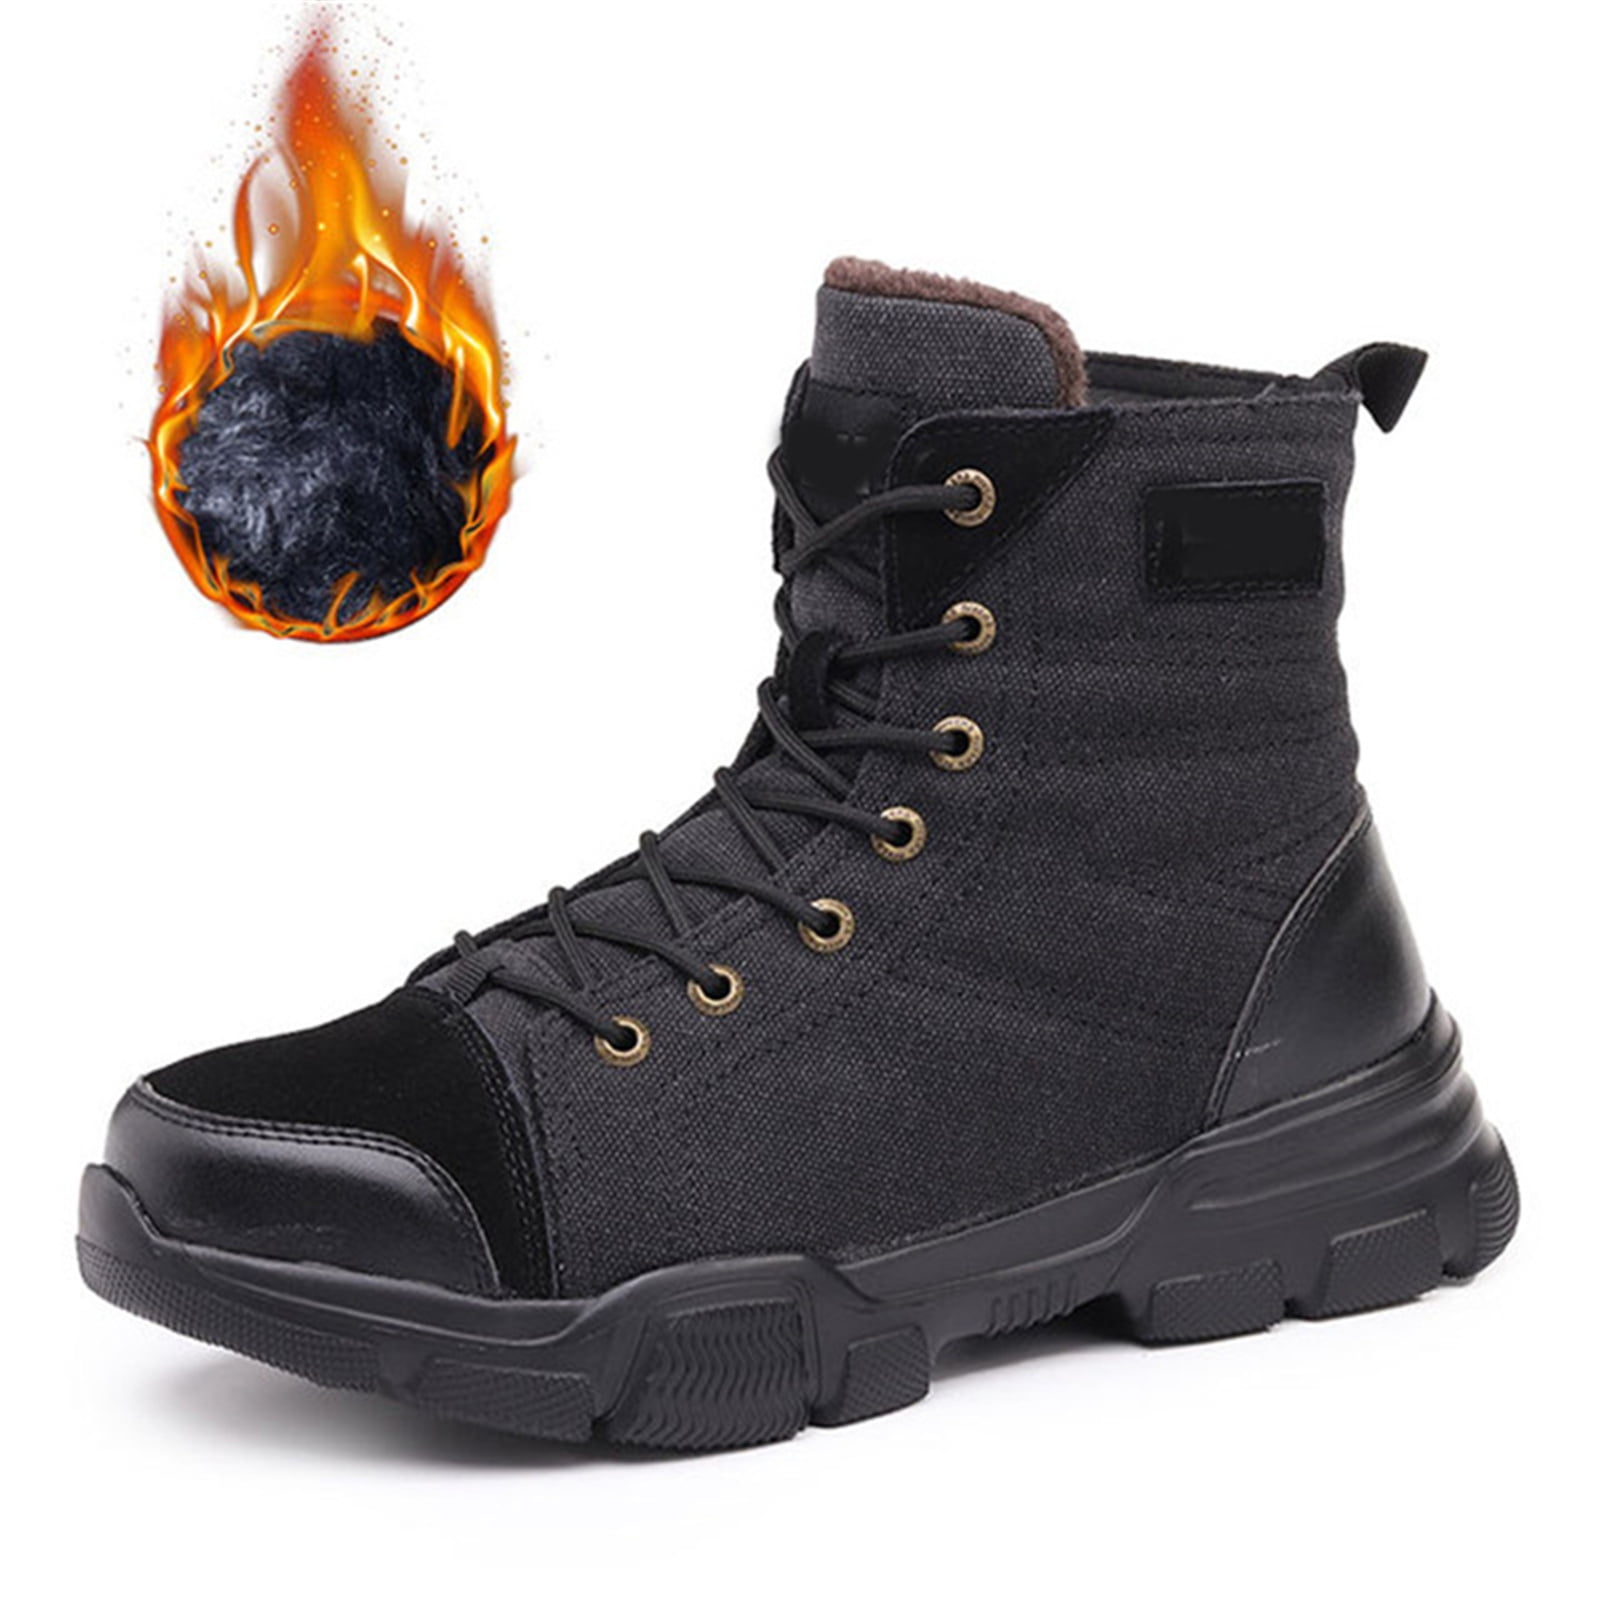 Men's Work Safety Shoes Indestructible Steel Toe Water Boots Breathable Sneakers 